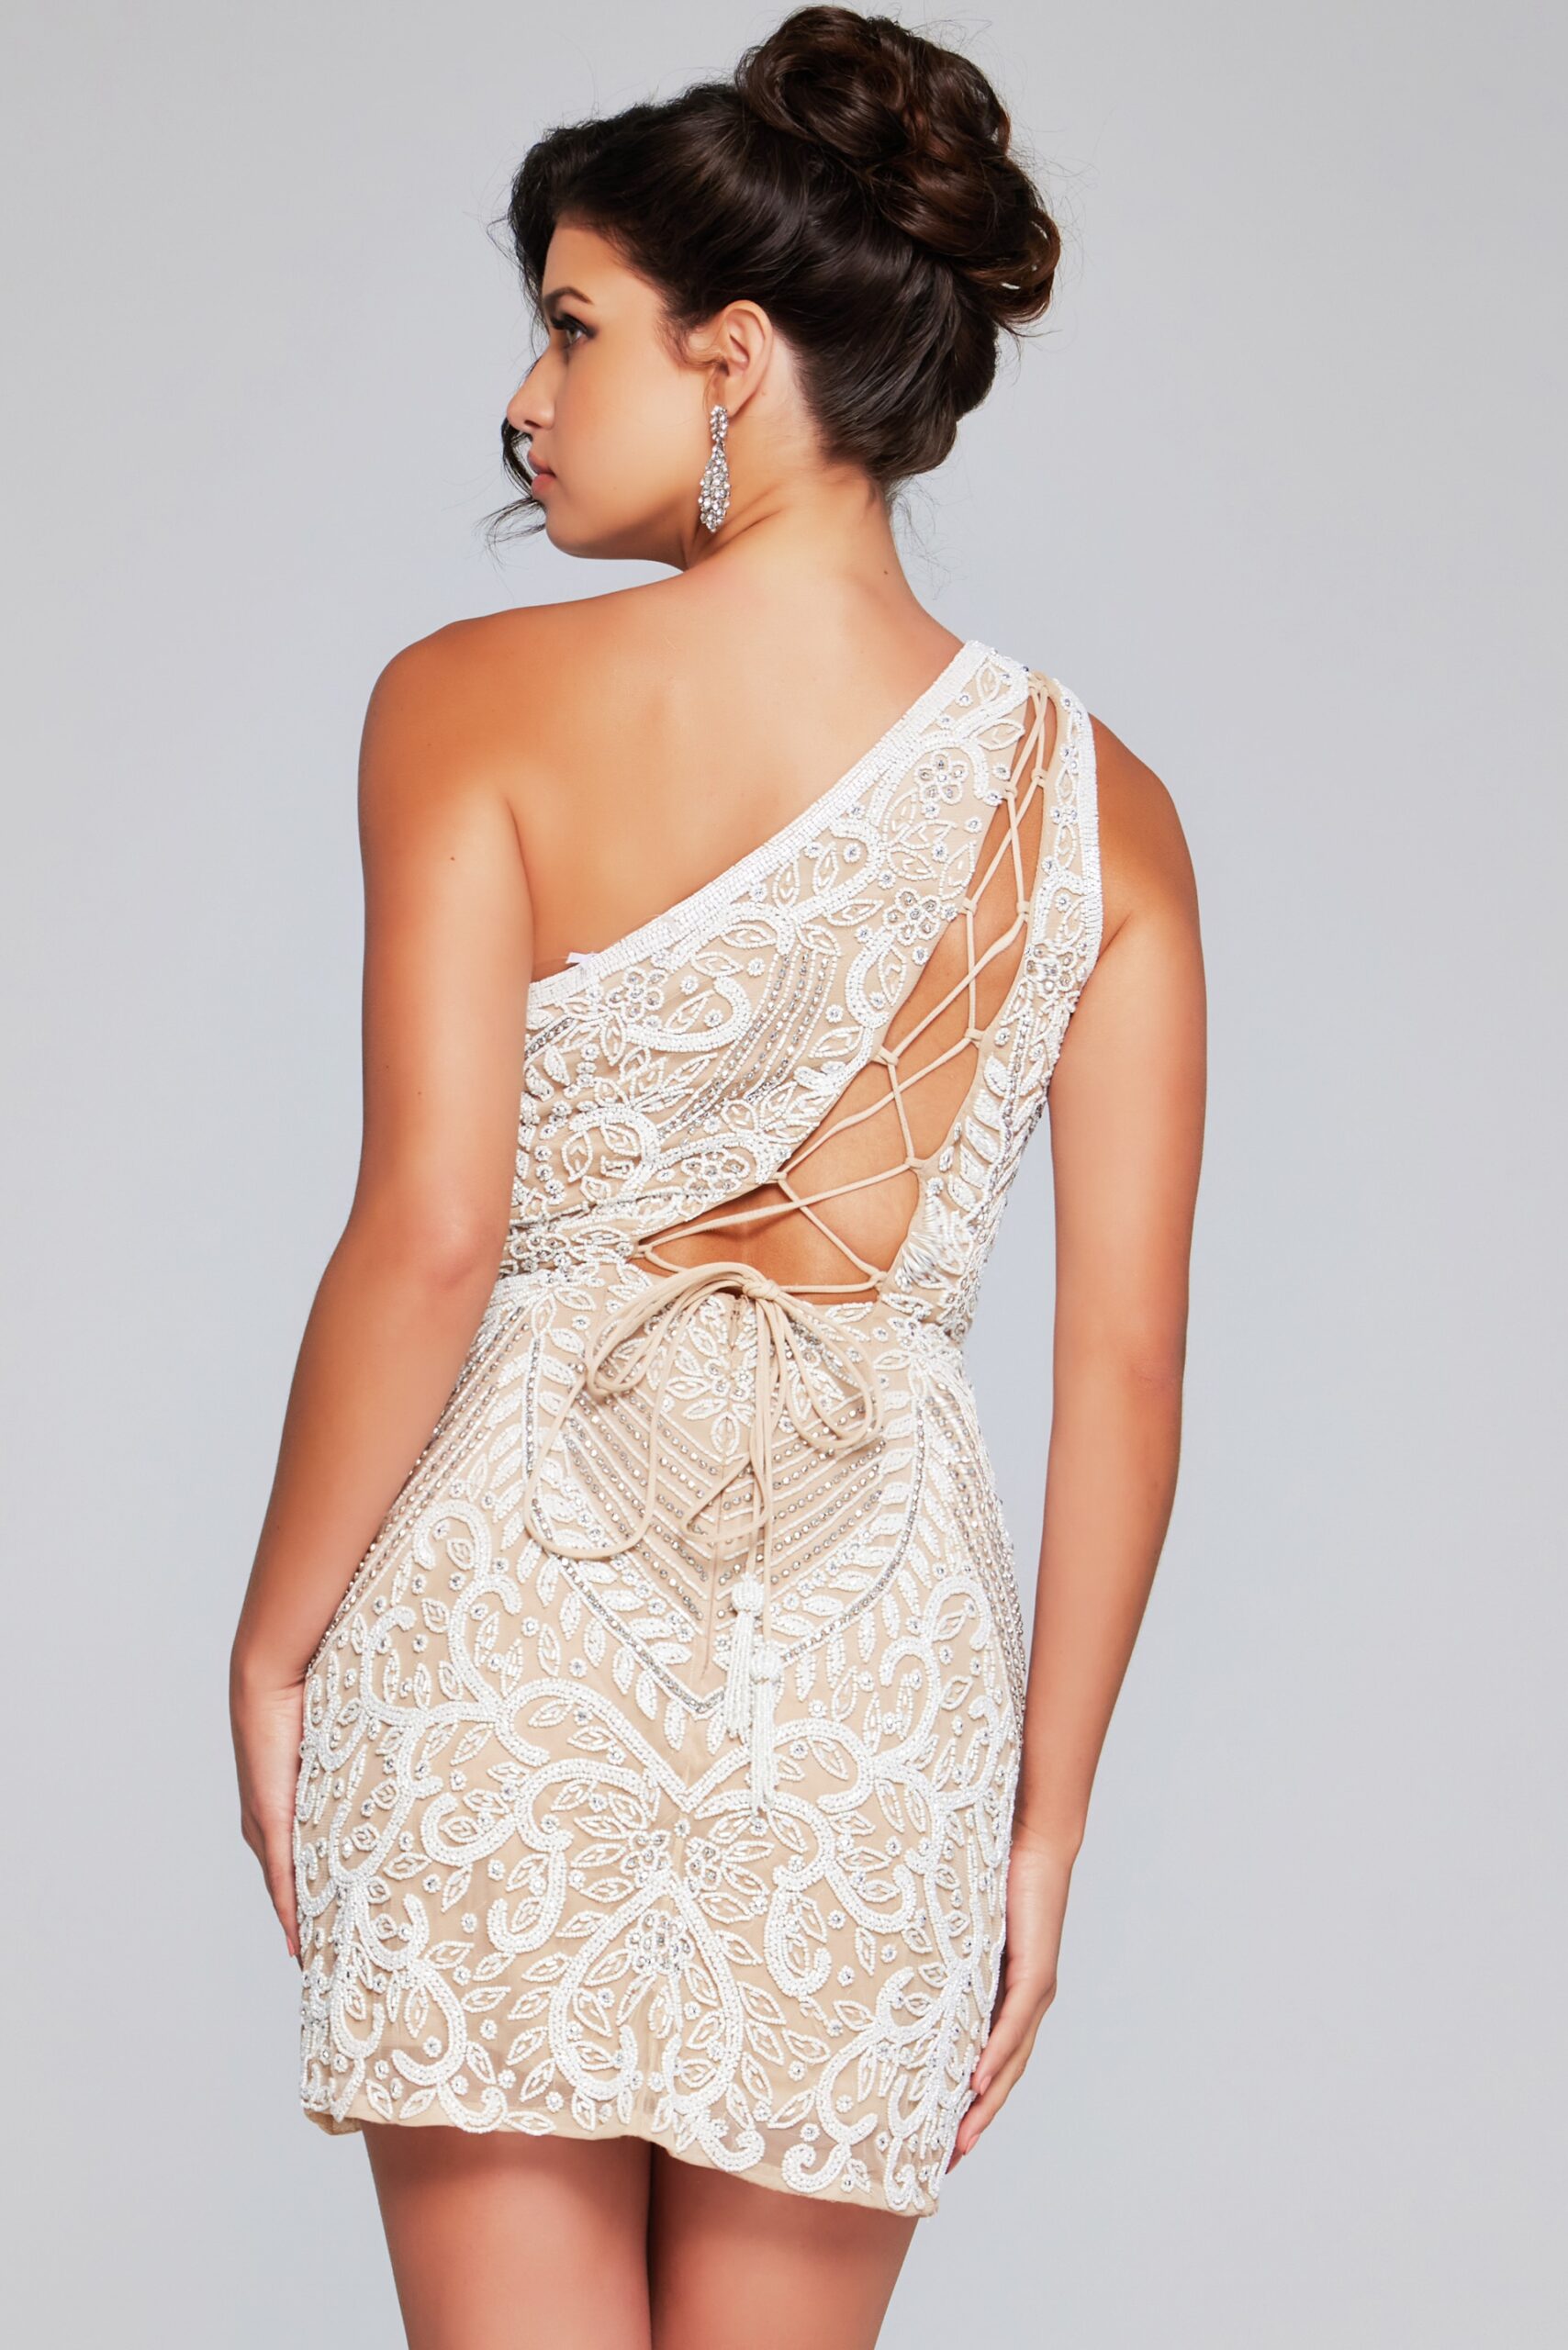 White and Nude Beaded One Shoulder Dress 39896